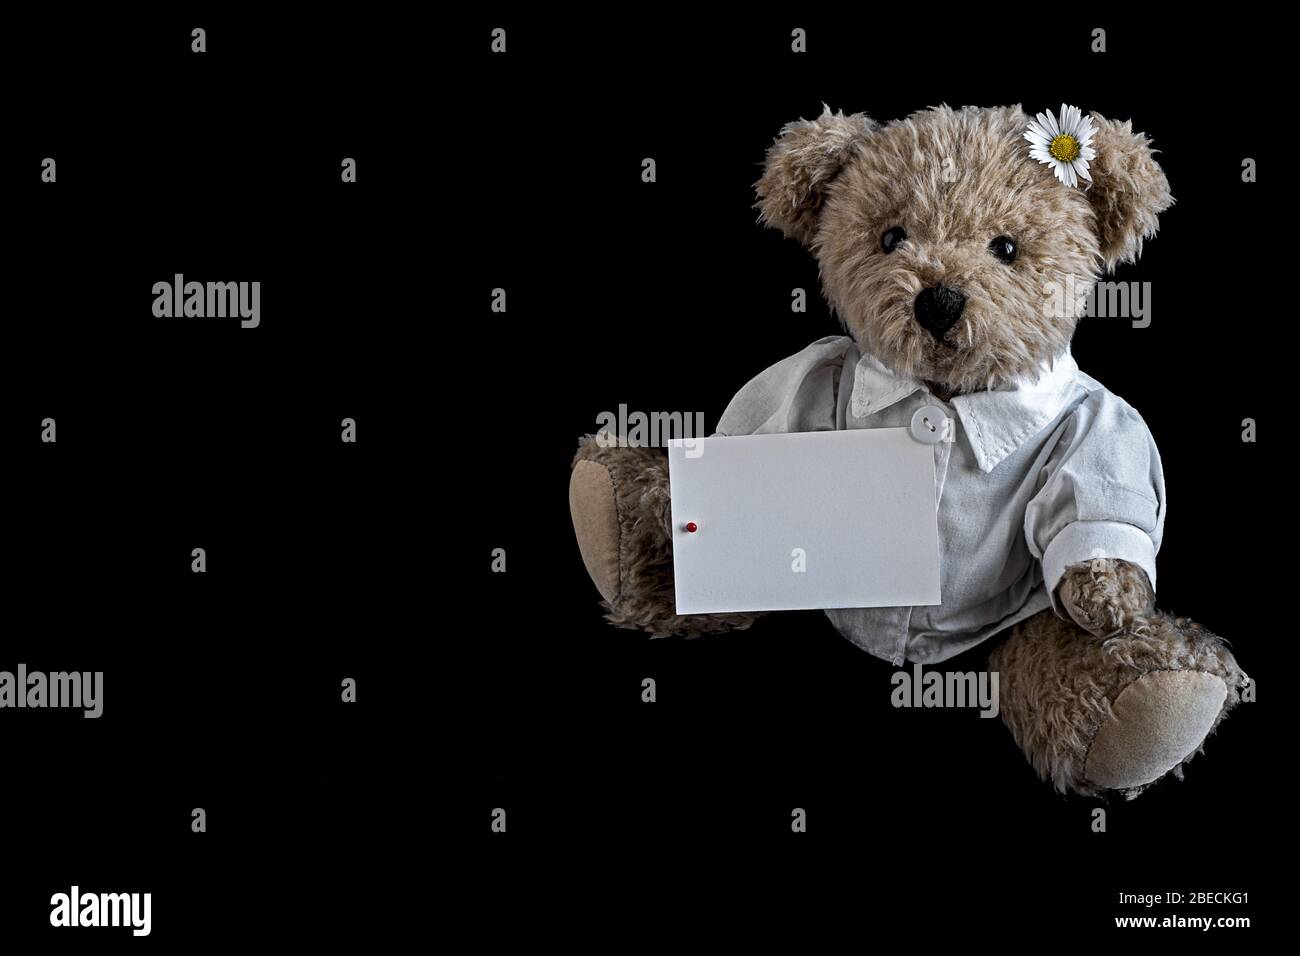 Stuffed hand made poorly bear with plaster and flowers for Get well soon  isolated over white background Stock Photo - Alamy